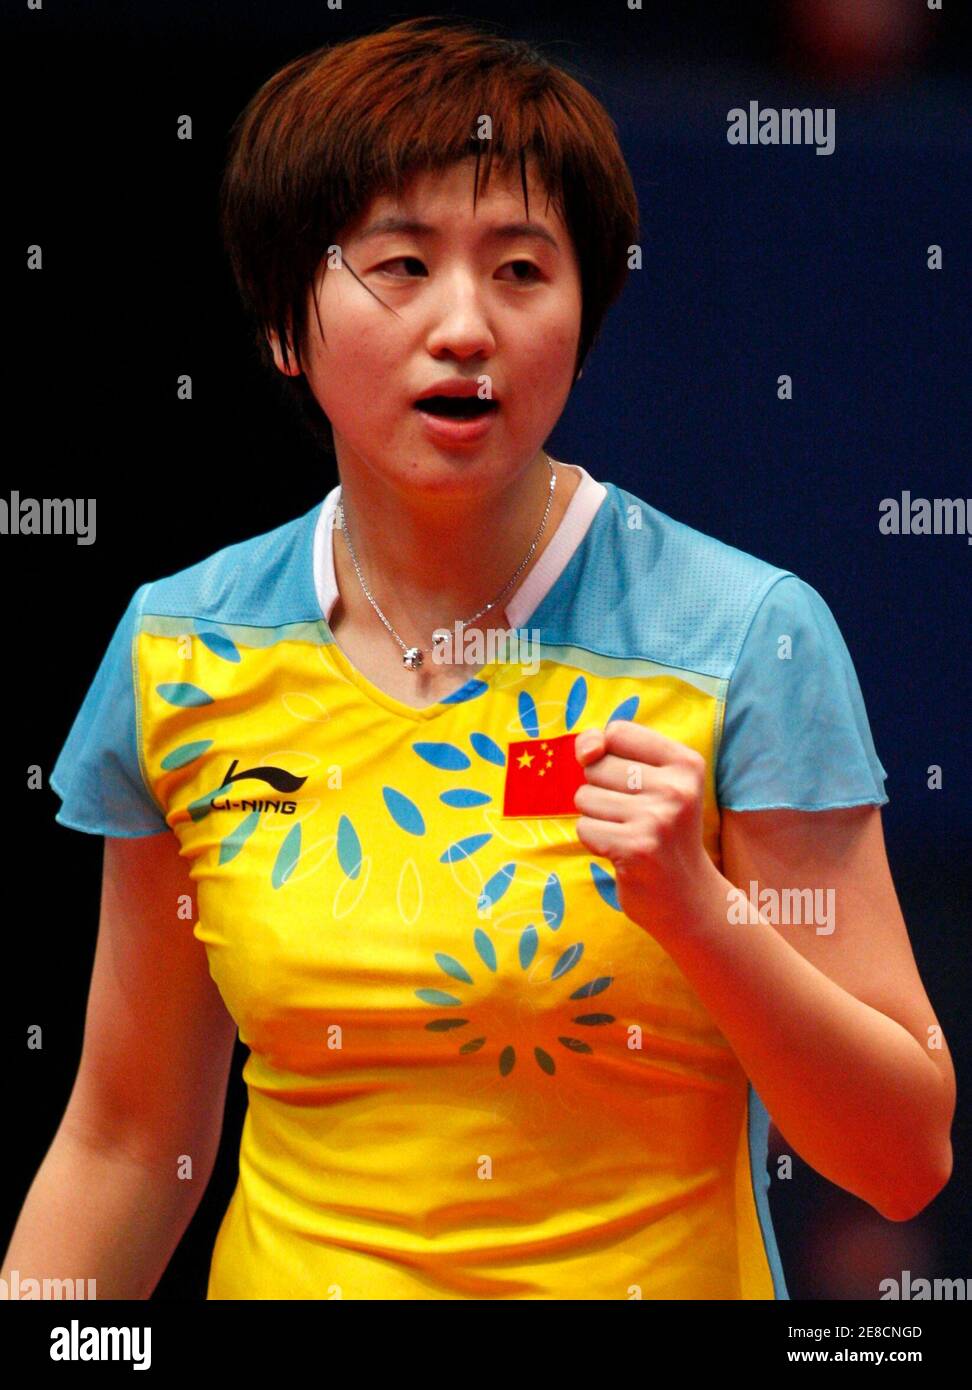 China's Yao Yan celebrates after winning a point during her table tennis women's singles semifinal match against South Korea's Seok Hajung at the East Asian Games in Hong Kong December 6, 2009. REUTERS/Tyrone Siu (CHINA SPORT TABLE TENNIS) Stock Photo